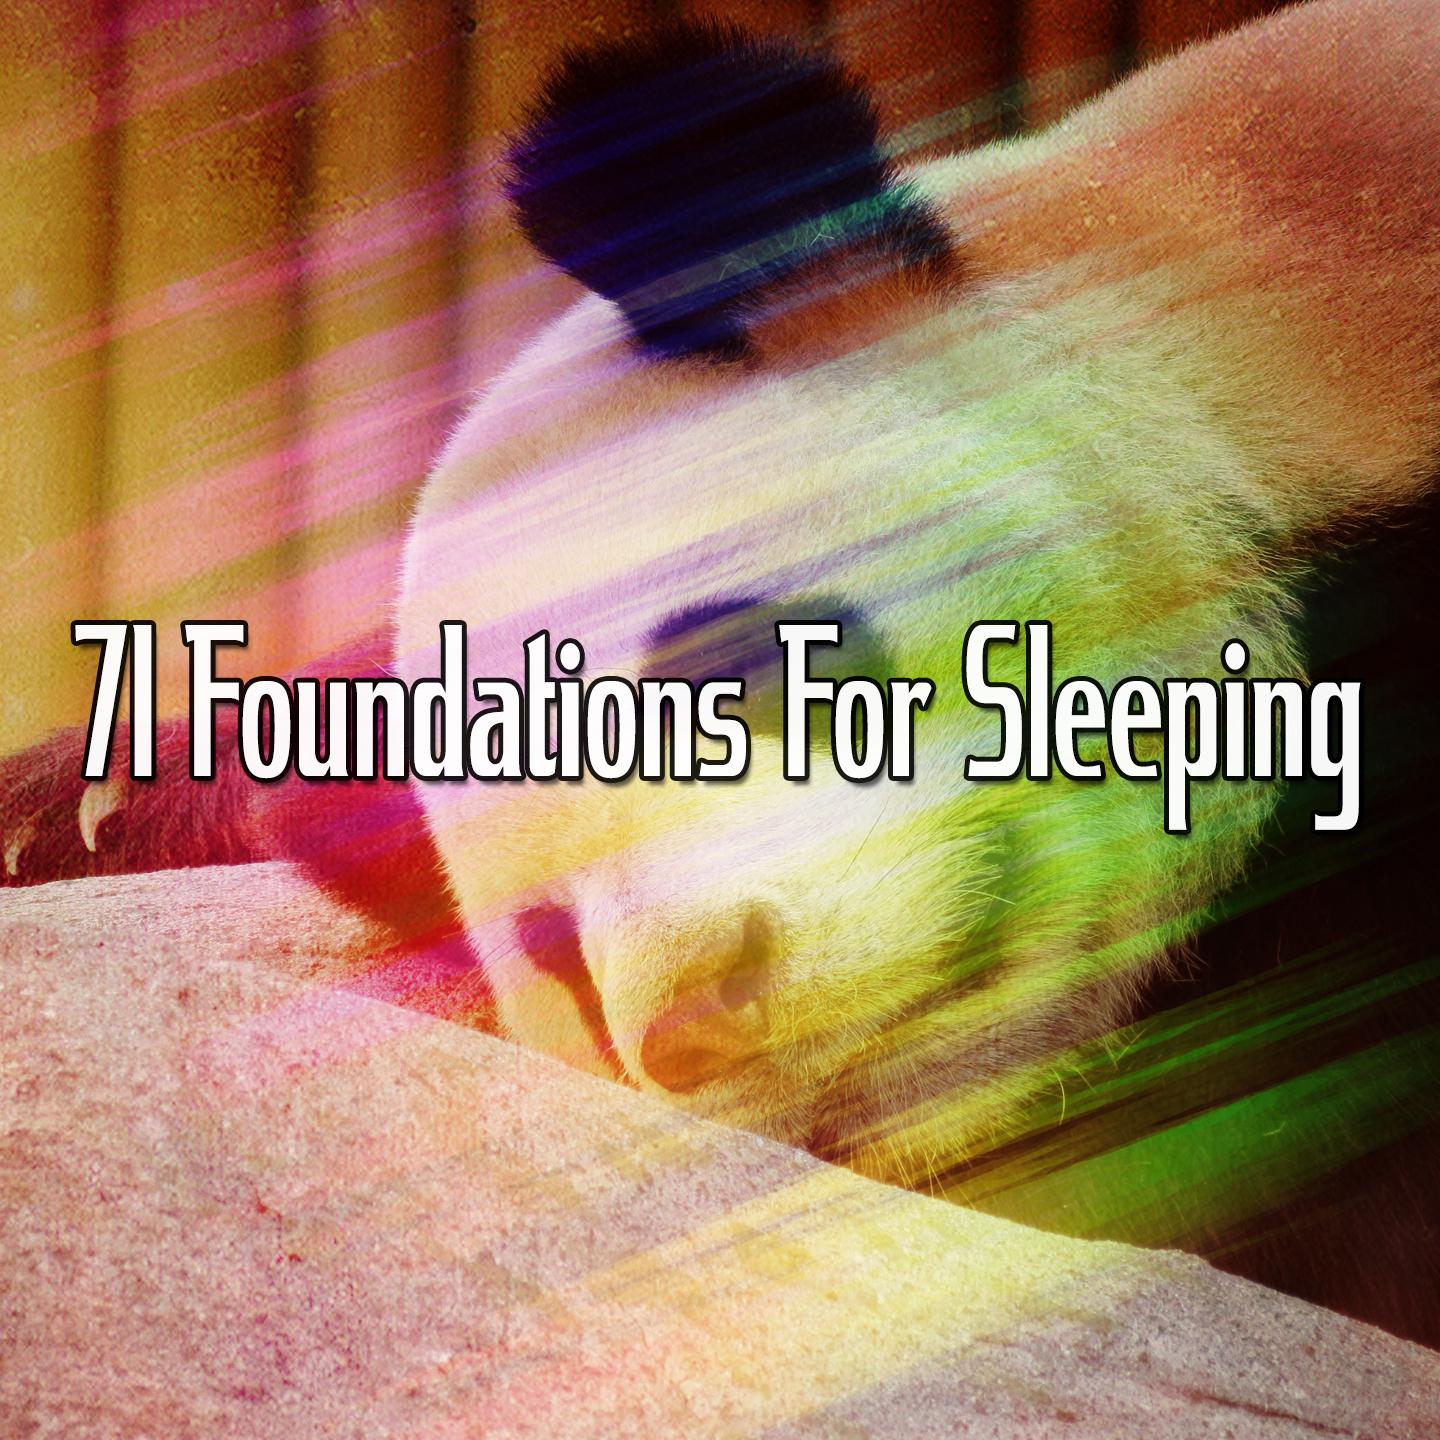 71 Foundations for Sleeping